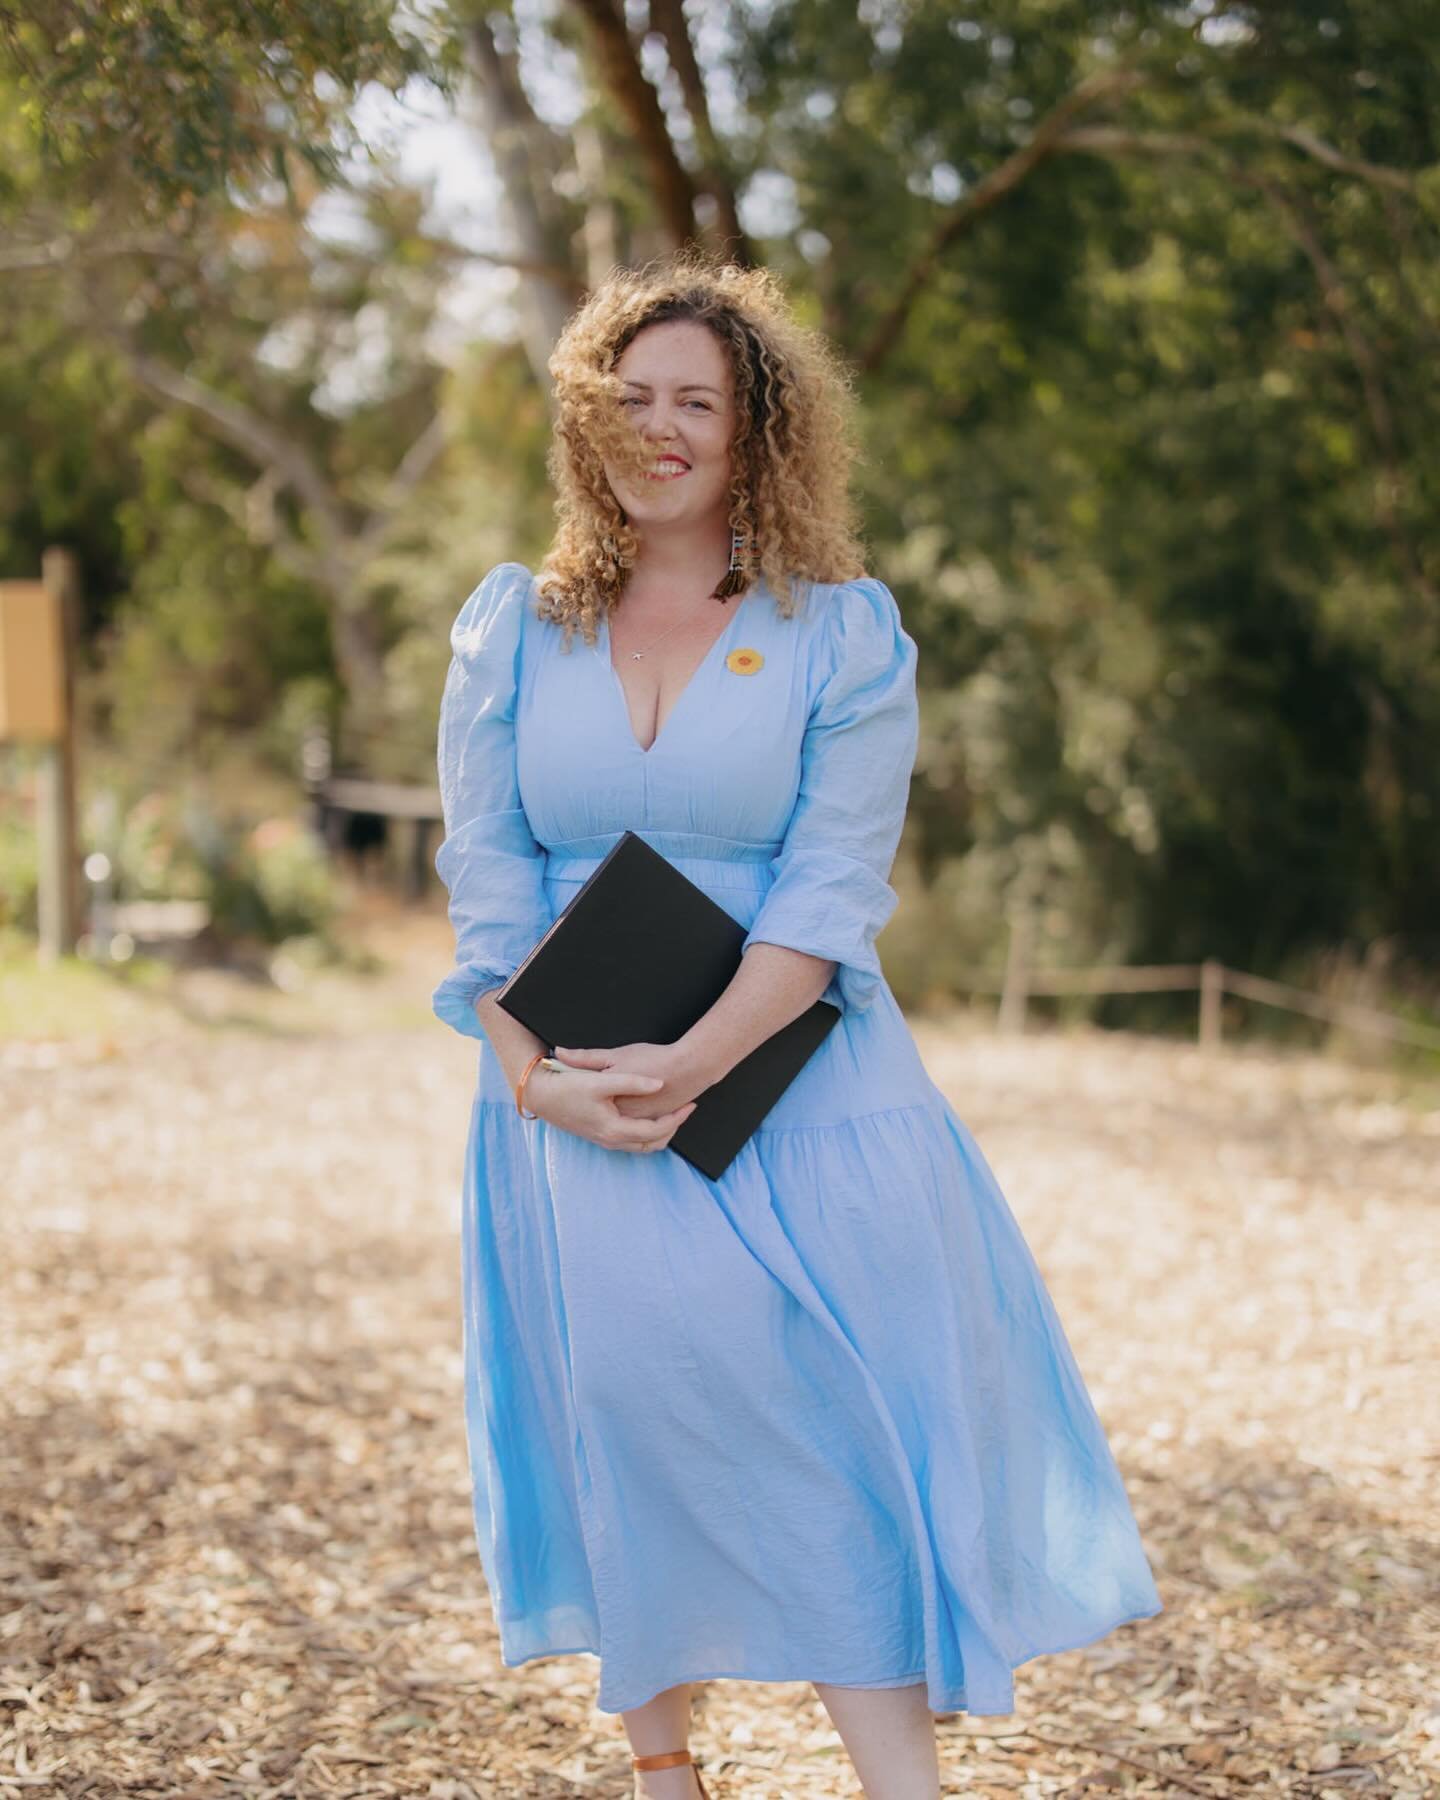 One wedding left for my season that is happening this Saturday at @wyangapark with @kyraboyerweddings - who also happened to take this gorgeous pic of me at @collingwoodchildrensfarm for Rach and Nathan&rsquo;s wedding. 

I&rsquo;ve got only limited 